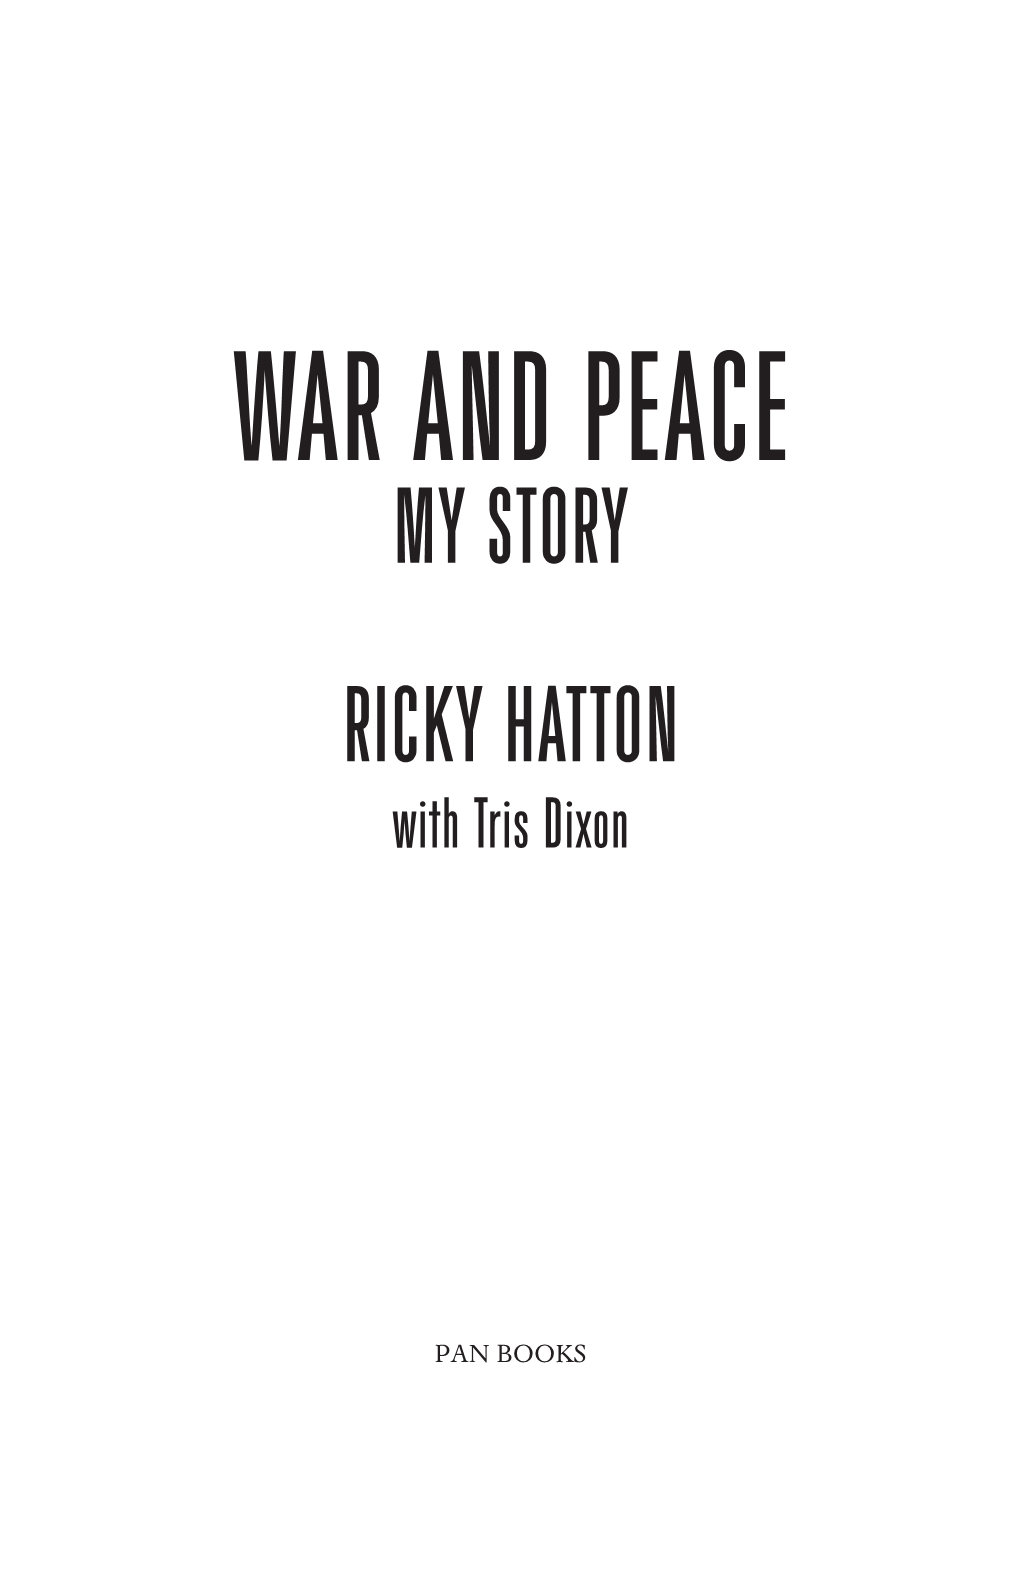 WAR and PEACE MY STORY RICKY HATTON with Tris Dixon